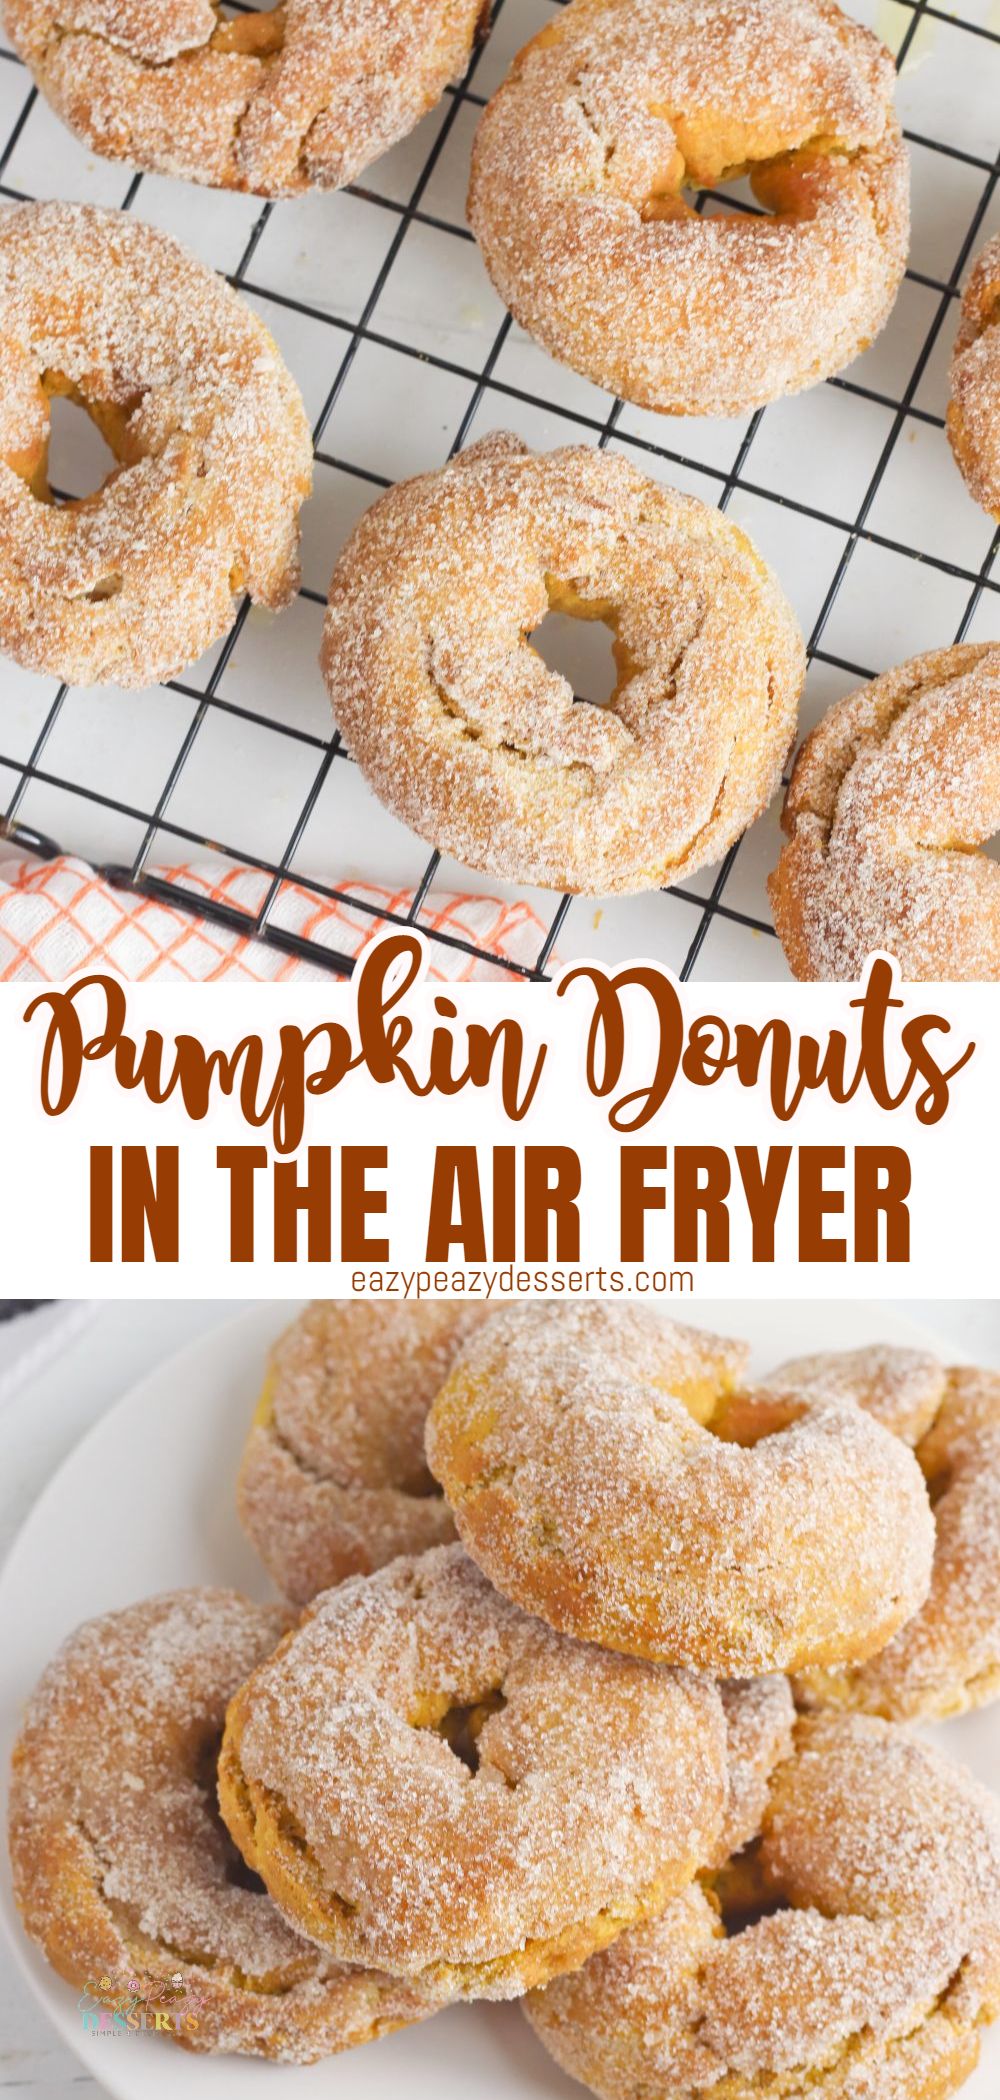 Photo collage of pumpkin donuts made in the air fryer